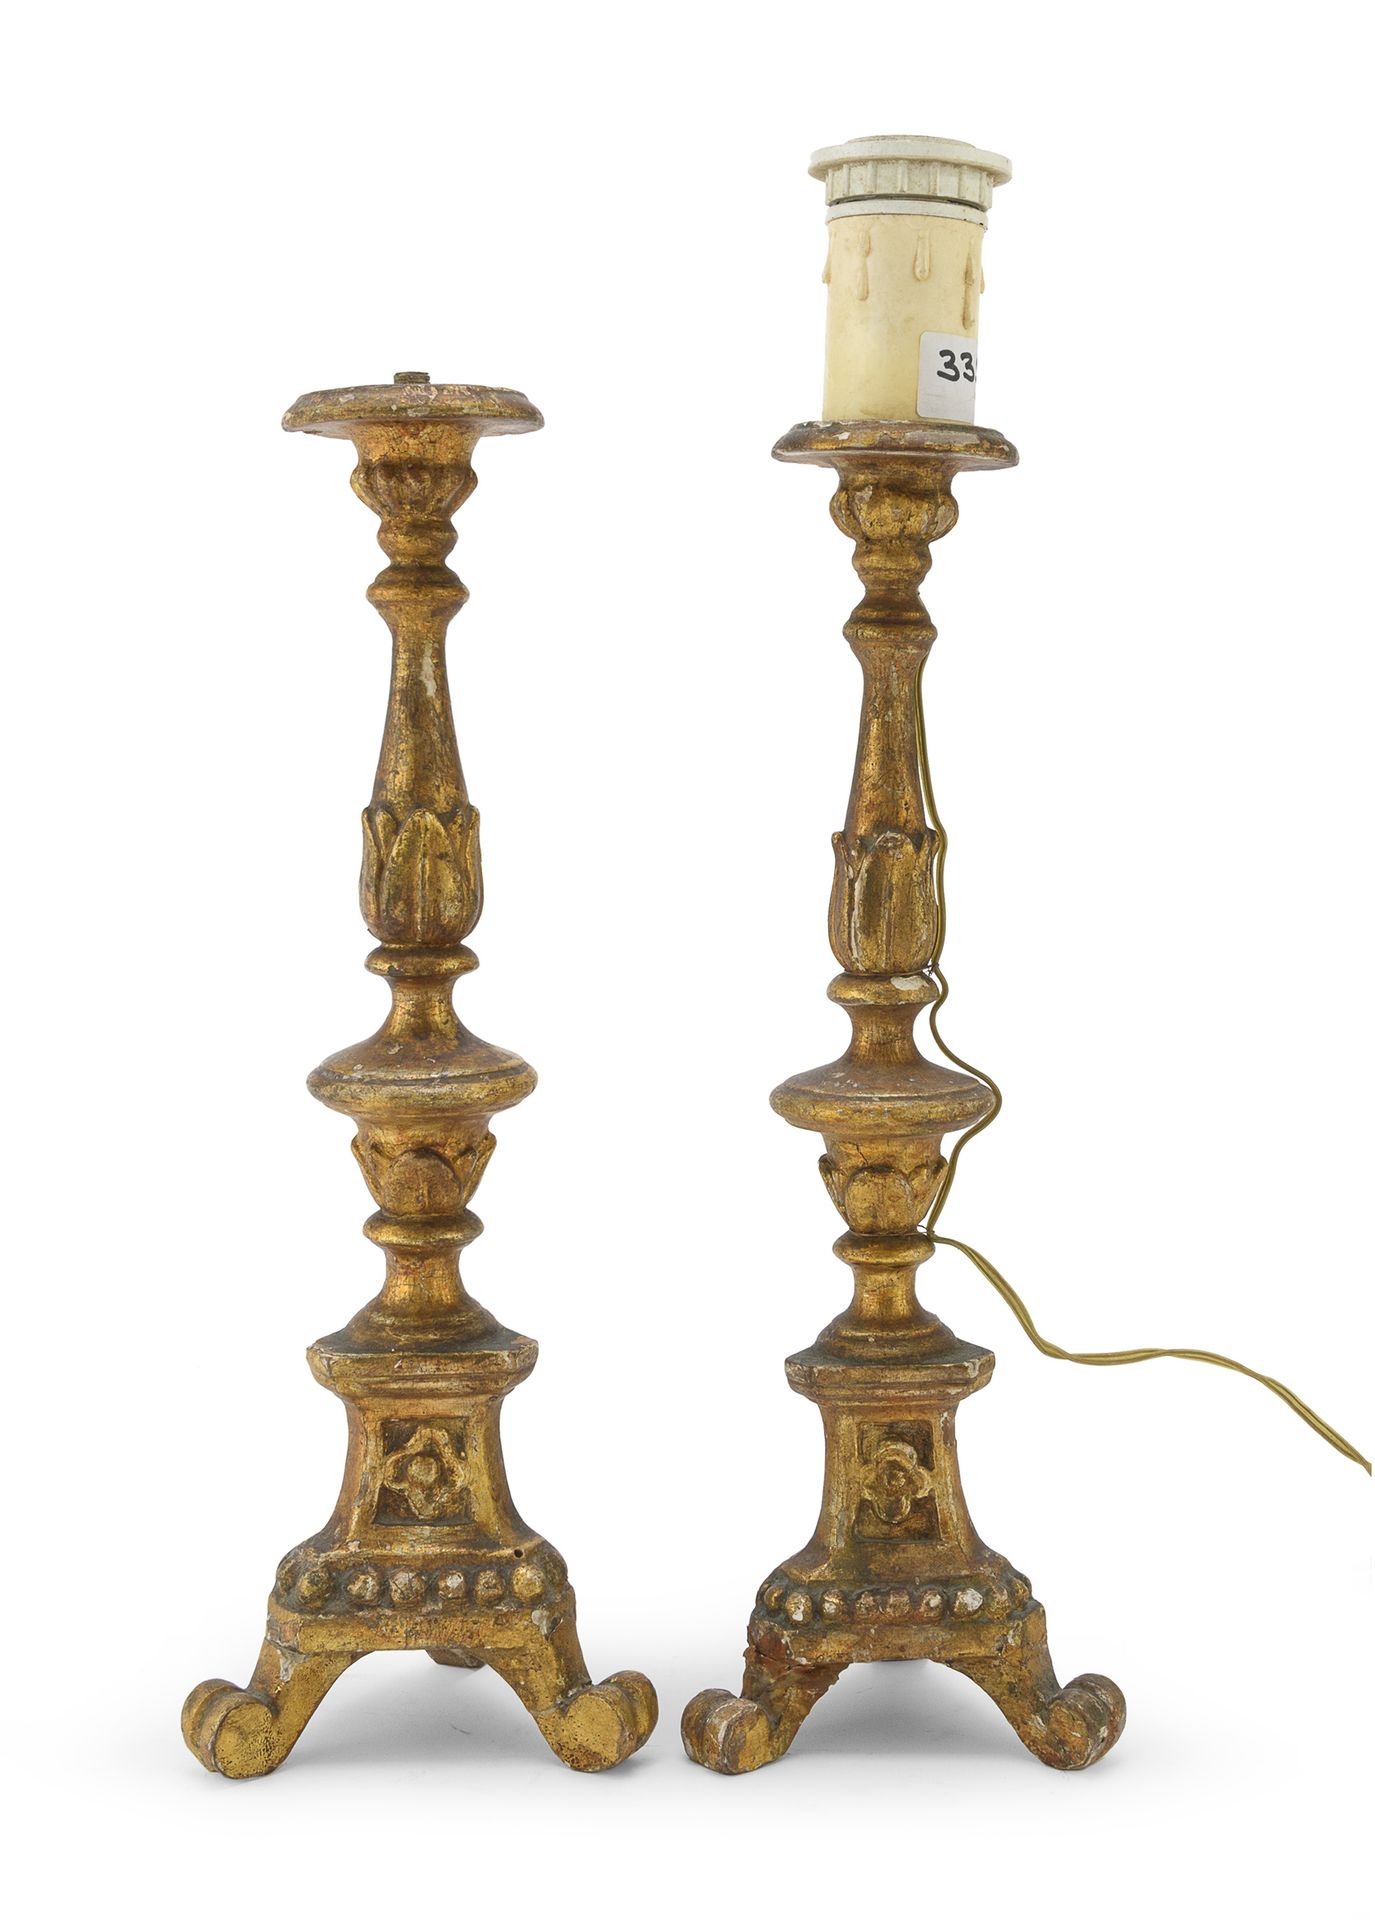 Null PAIR OF CANDLESTICKS IN GILTWOOD, 18th CENTURY